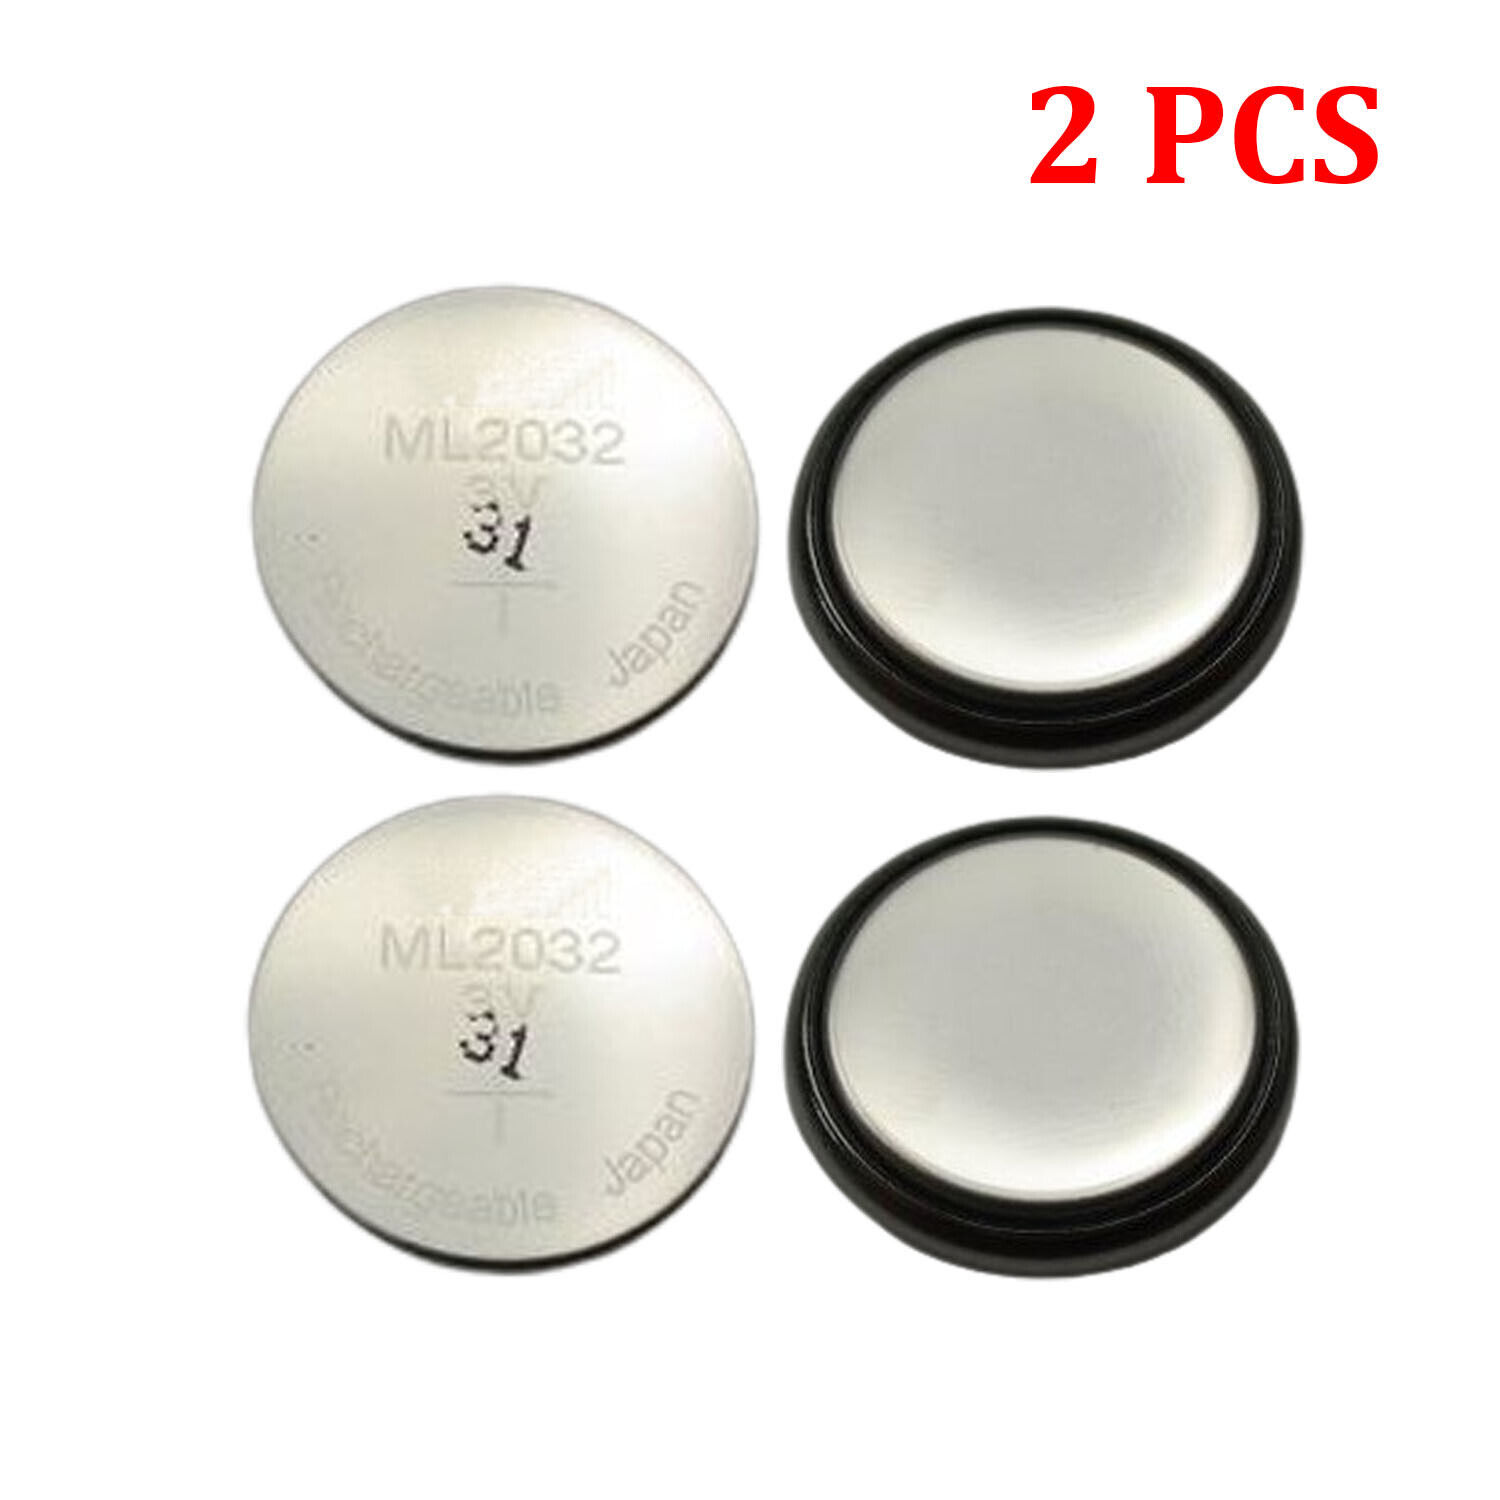 2X Rechargeable Lithium RTC Bios CMOS Battery for ML2032 3v